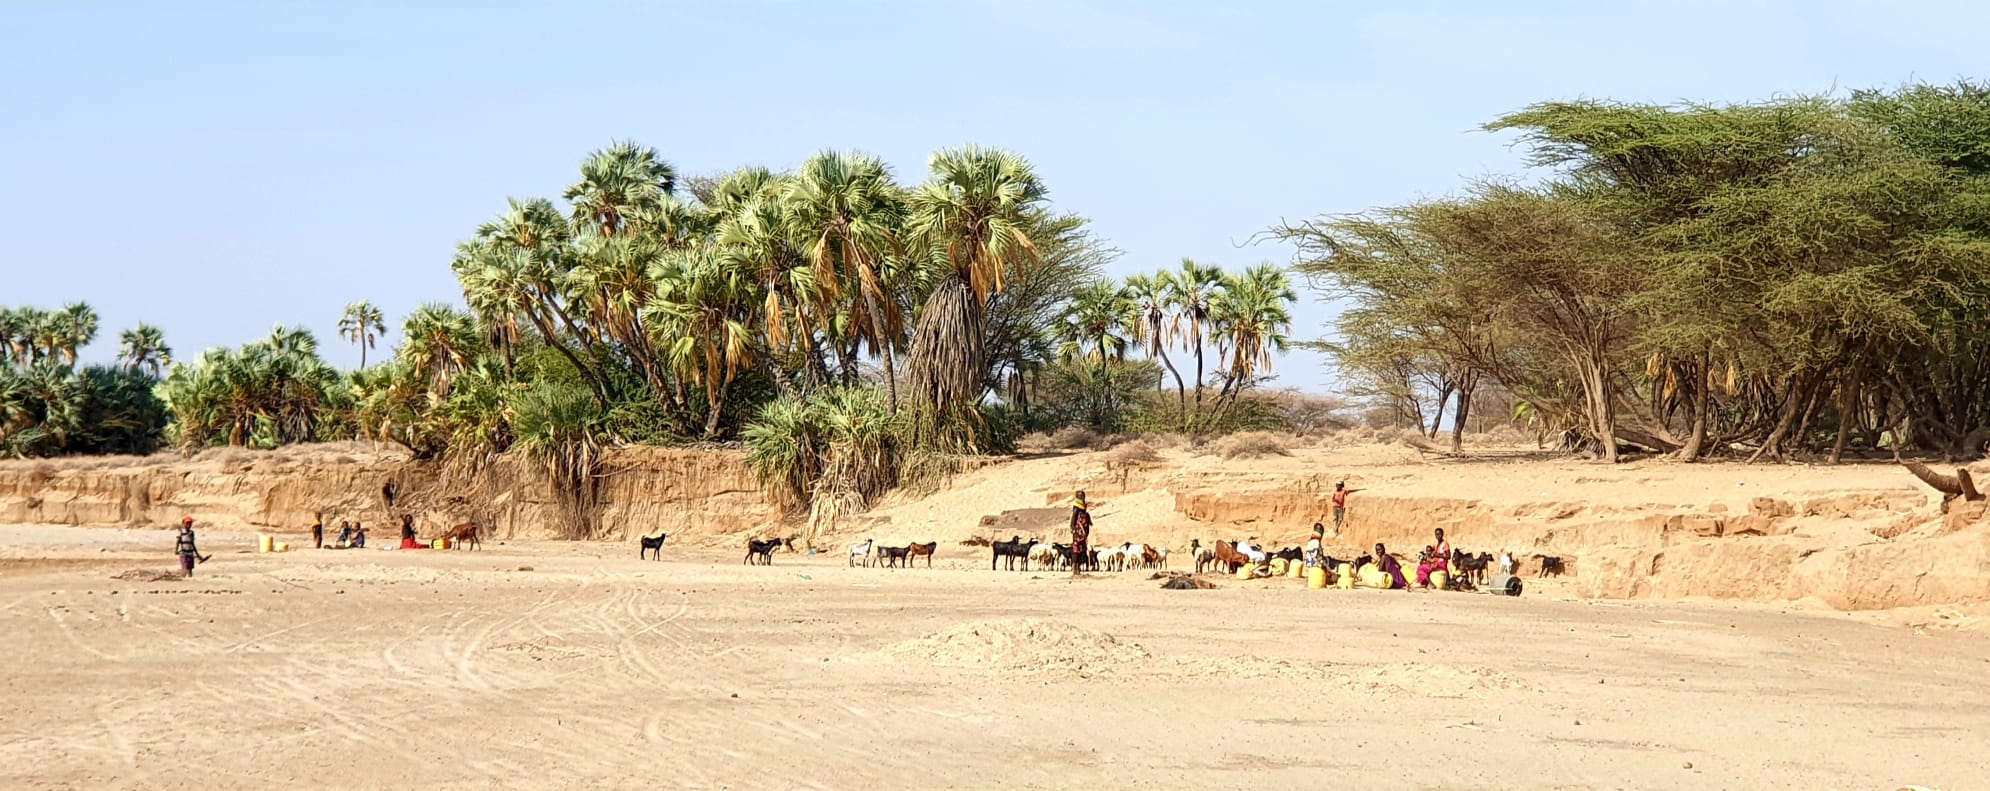 Turkana area with goats and people